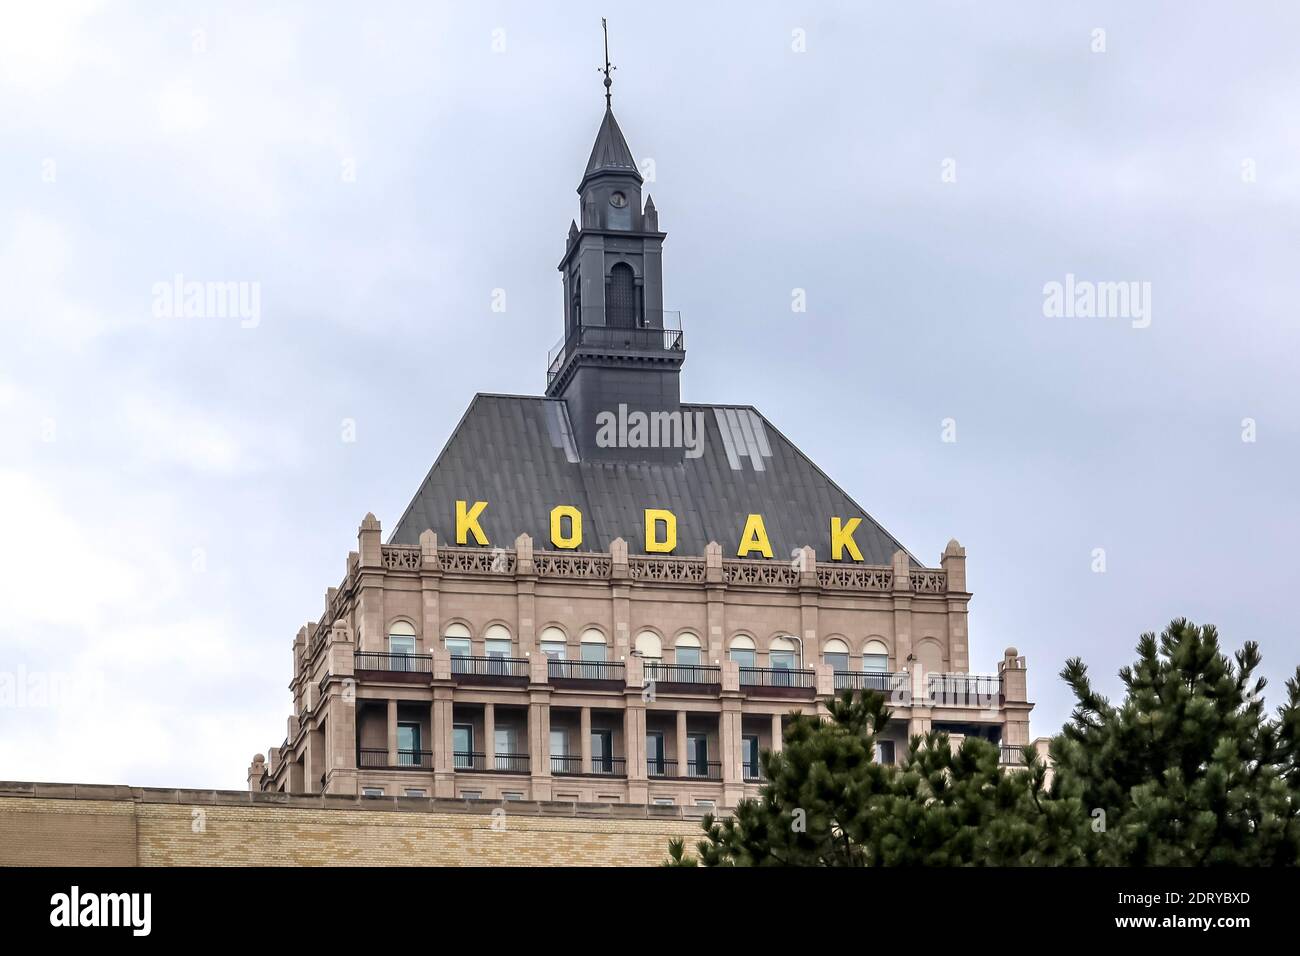 Kodak sign outside their world  headquarters in Rochester, USA. Stock Photo